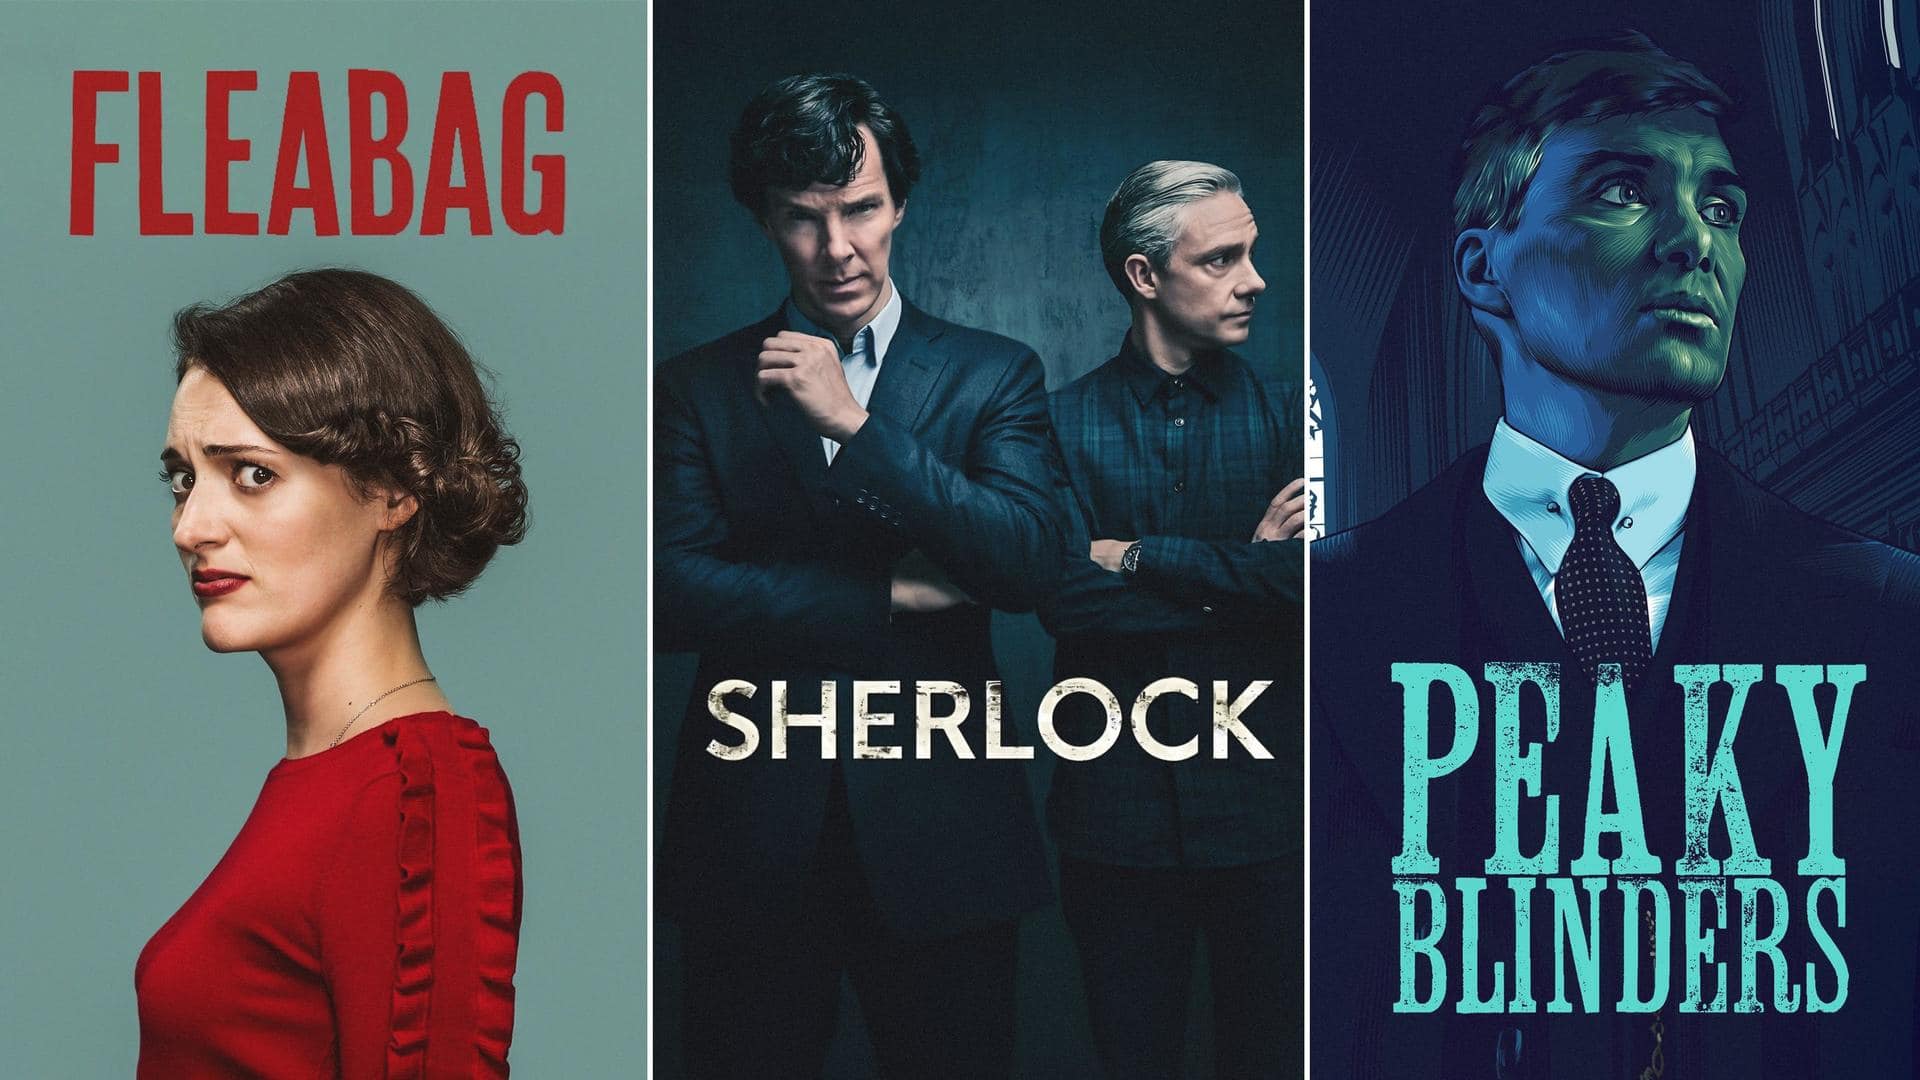 'Fleabag' to 'Sherlock': BBC's top productions